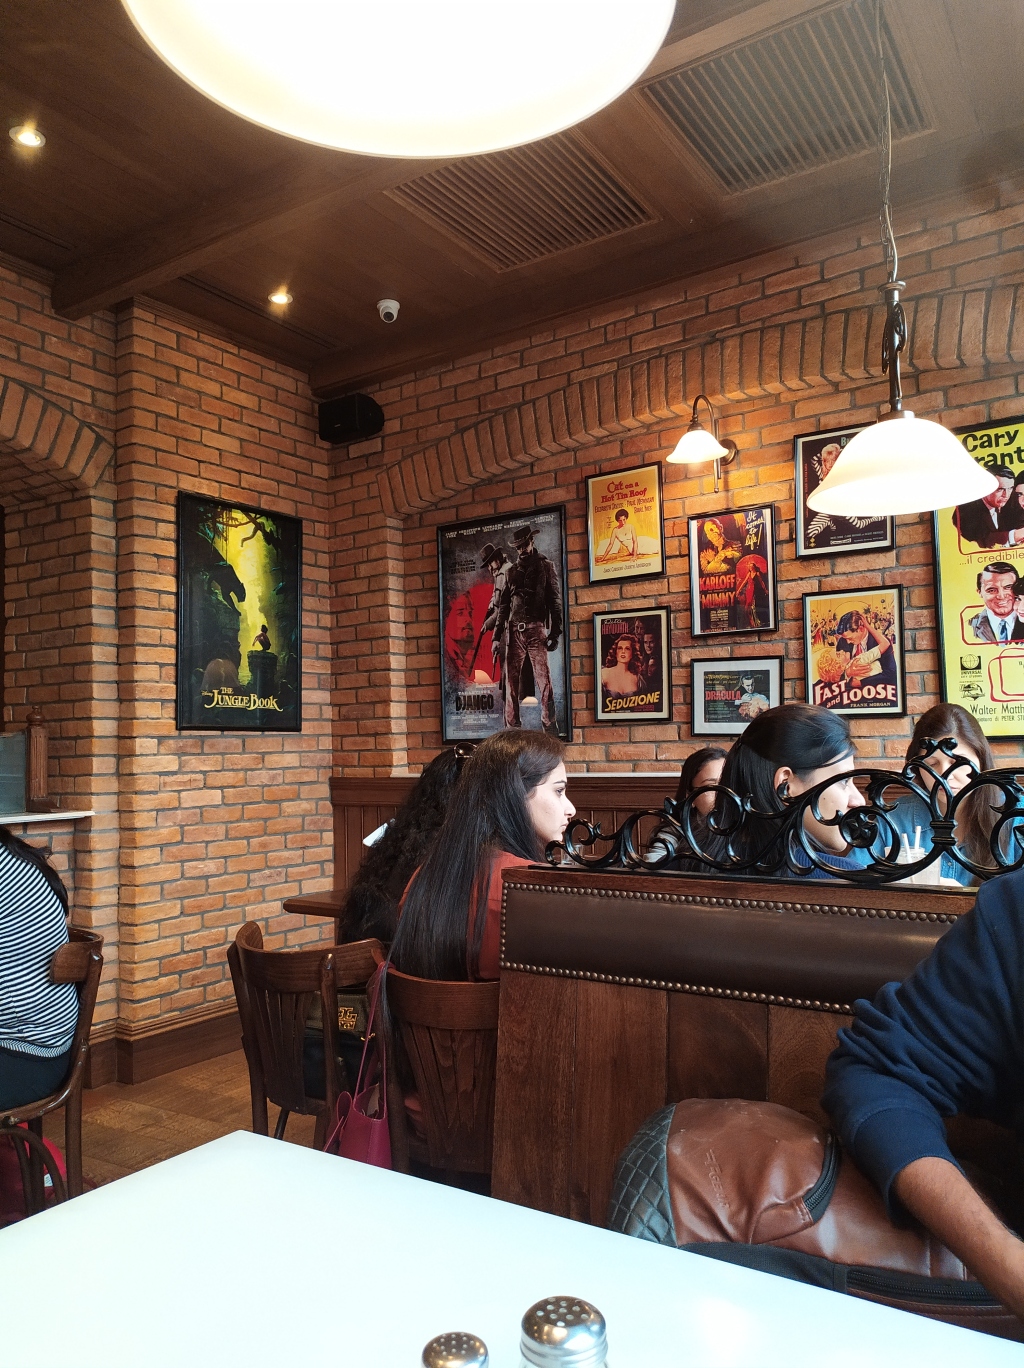 Big chill cafe – Utopia for those who love Italian food?